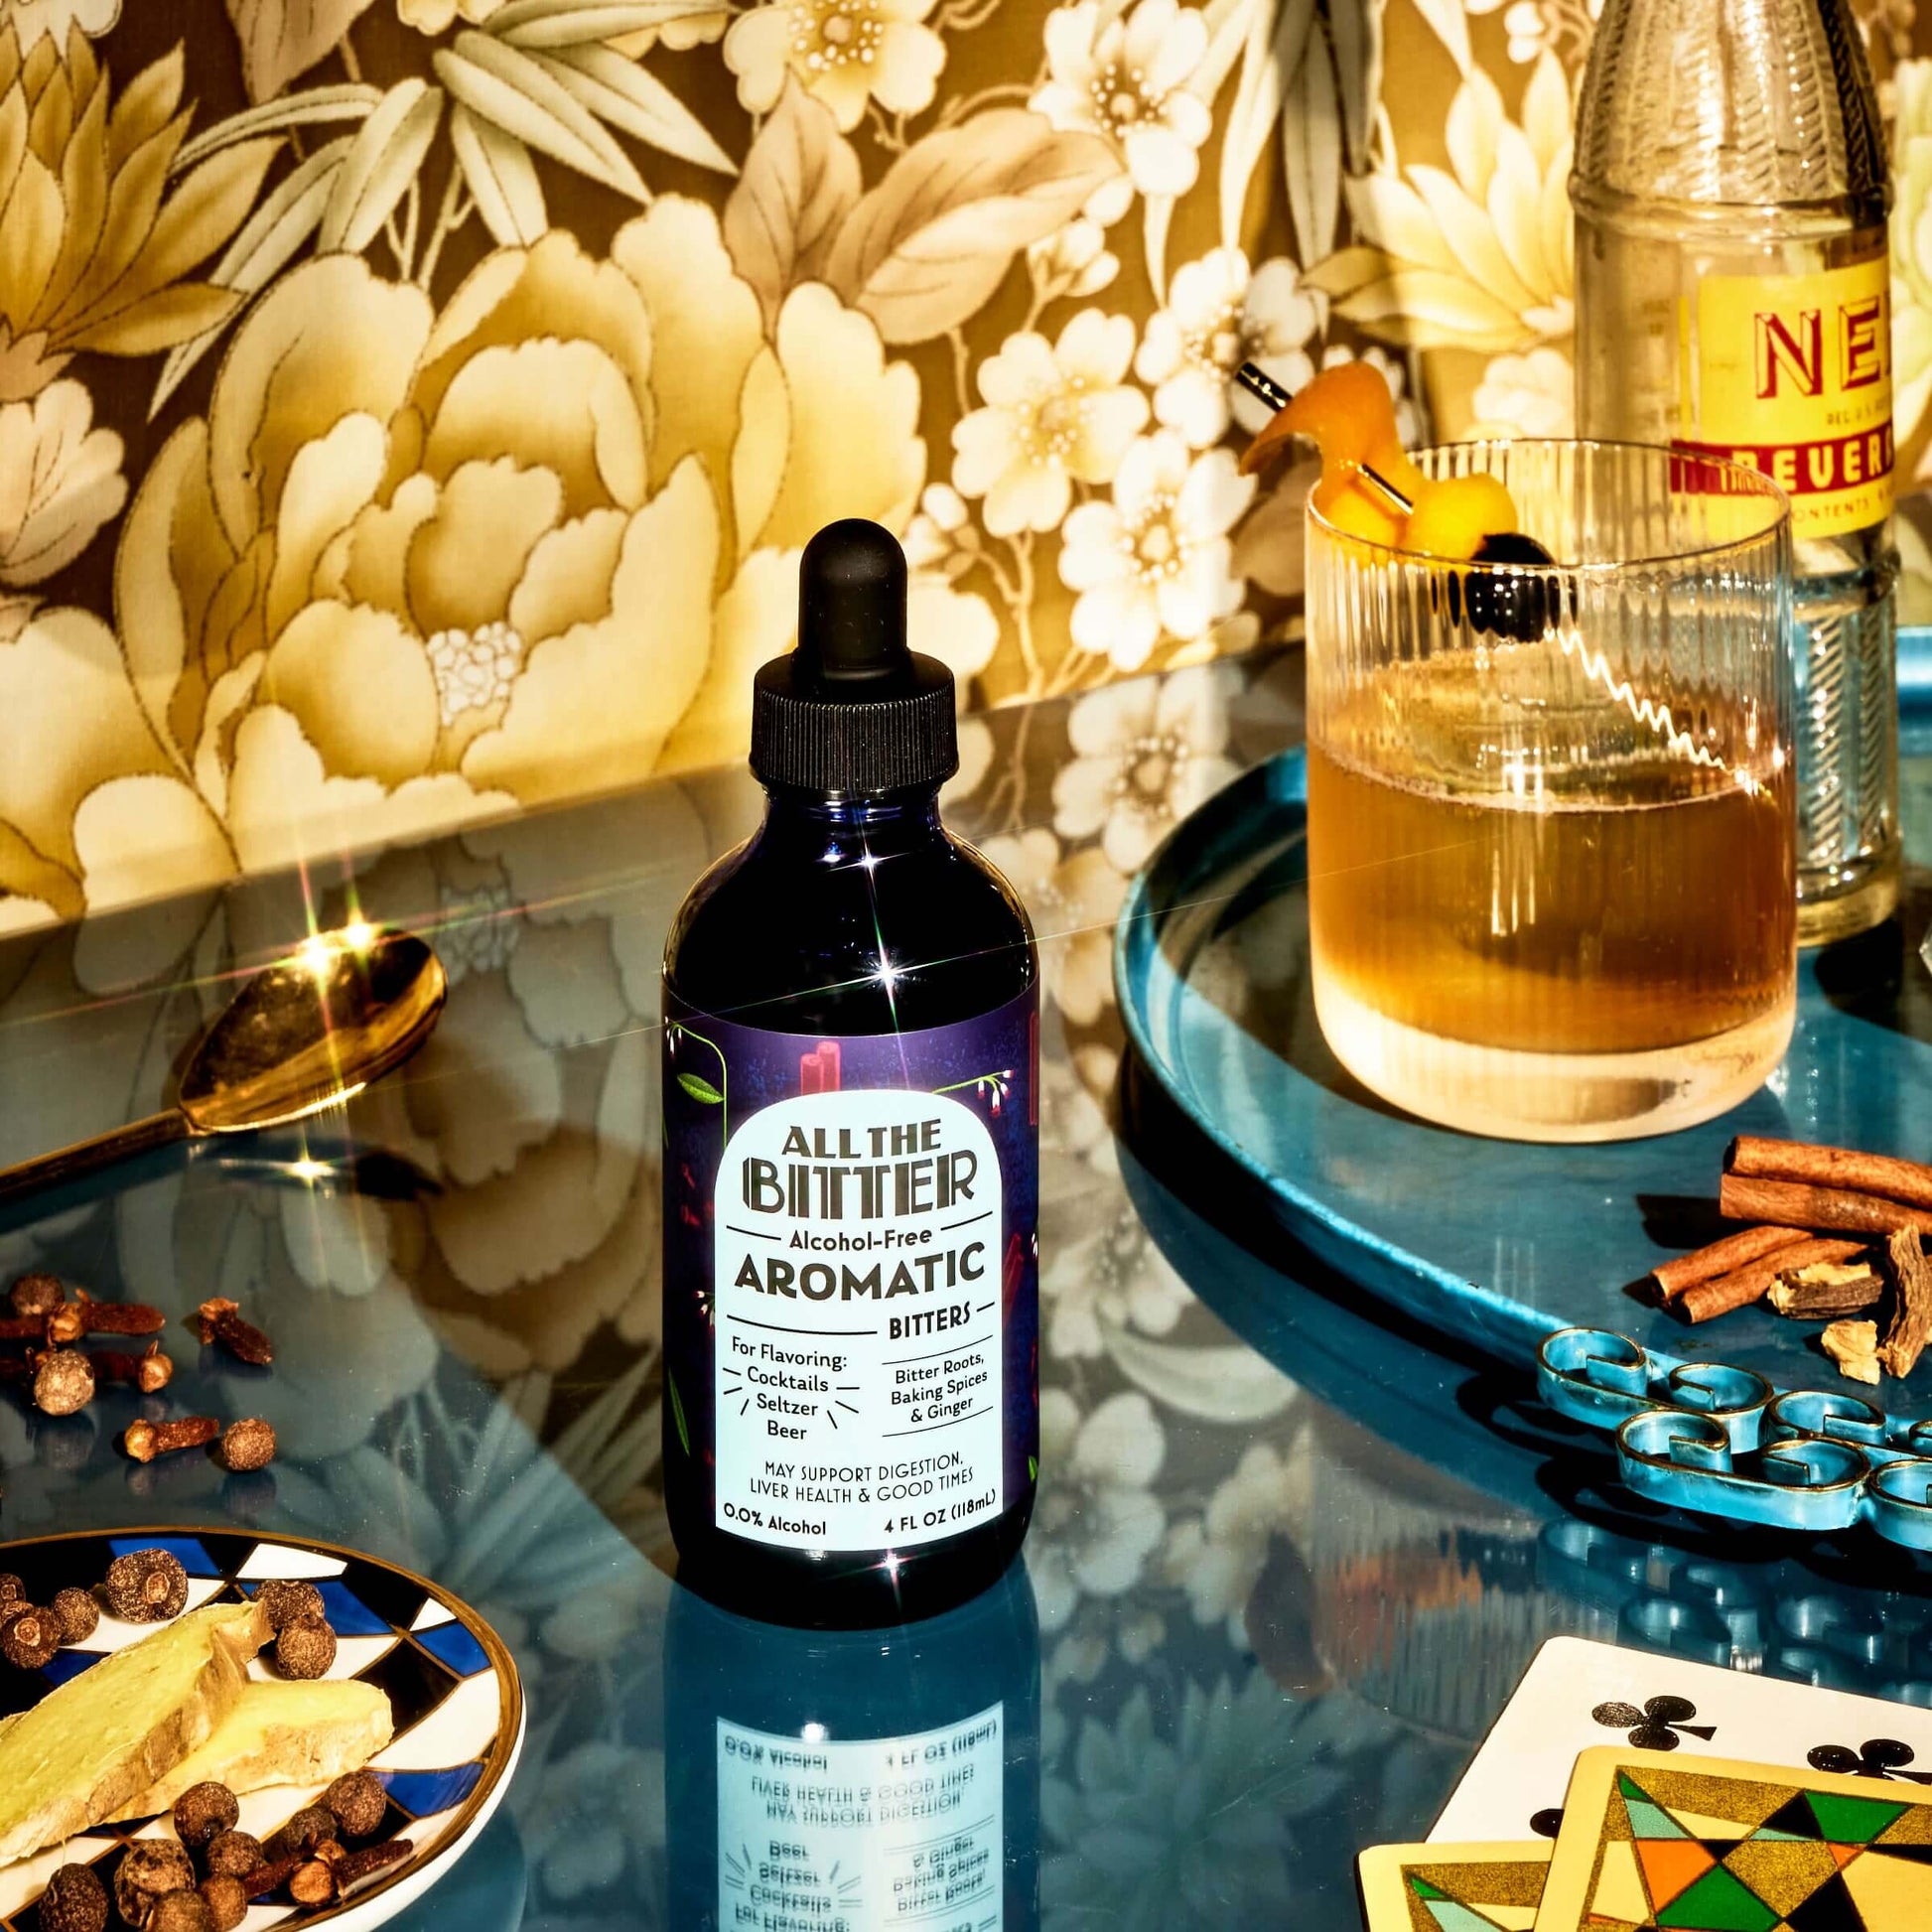 All The Bitter Aromatic non-alcoholic bitters pictured with a floral wallpapered background on a blue glass surface, a gold spoon, a cocktail in a whiskey glass on a turquoise tray with cinnamon sticks and other spices. Playing cards are pictured.